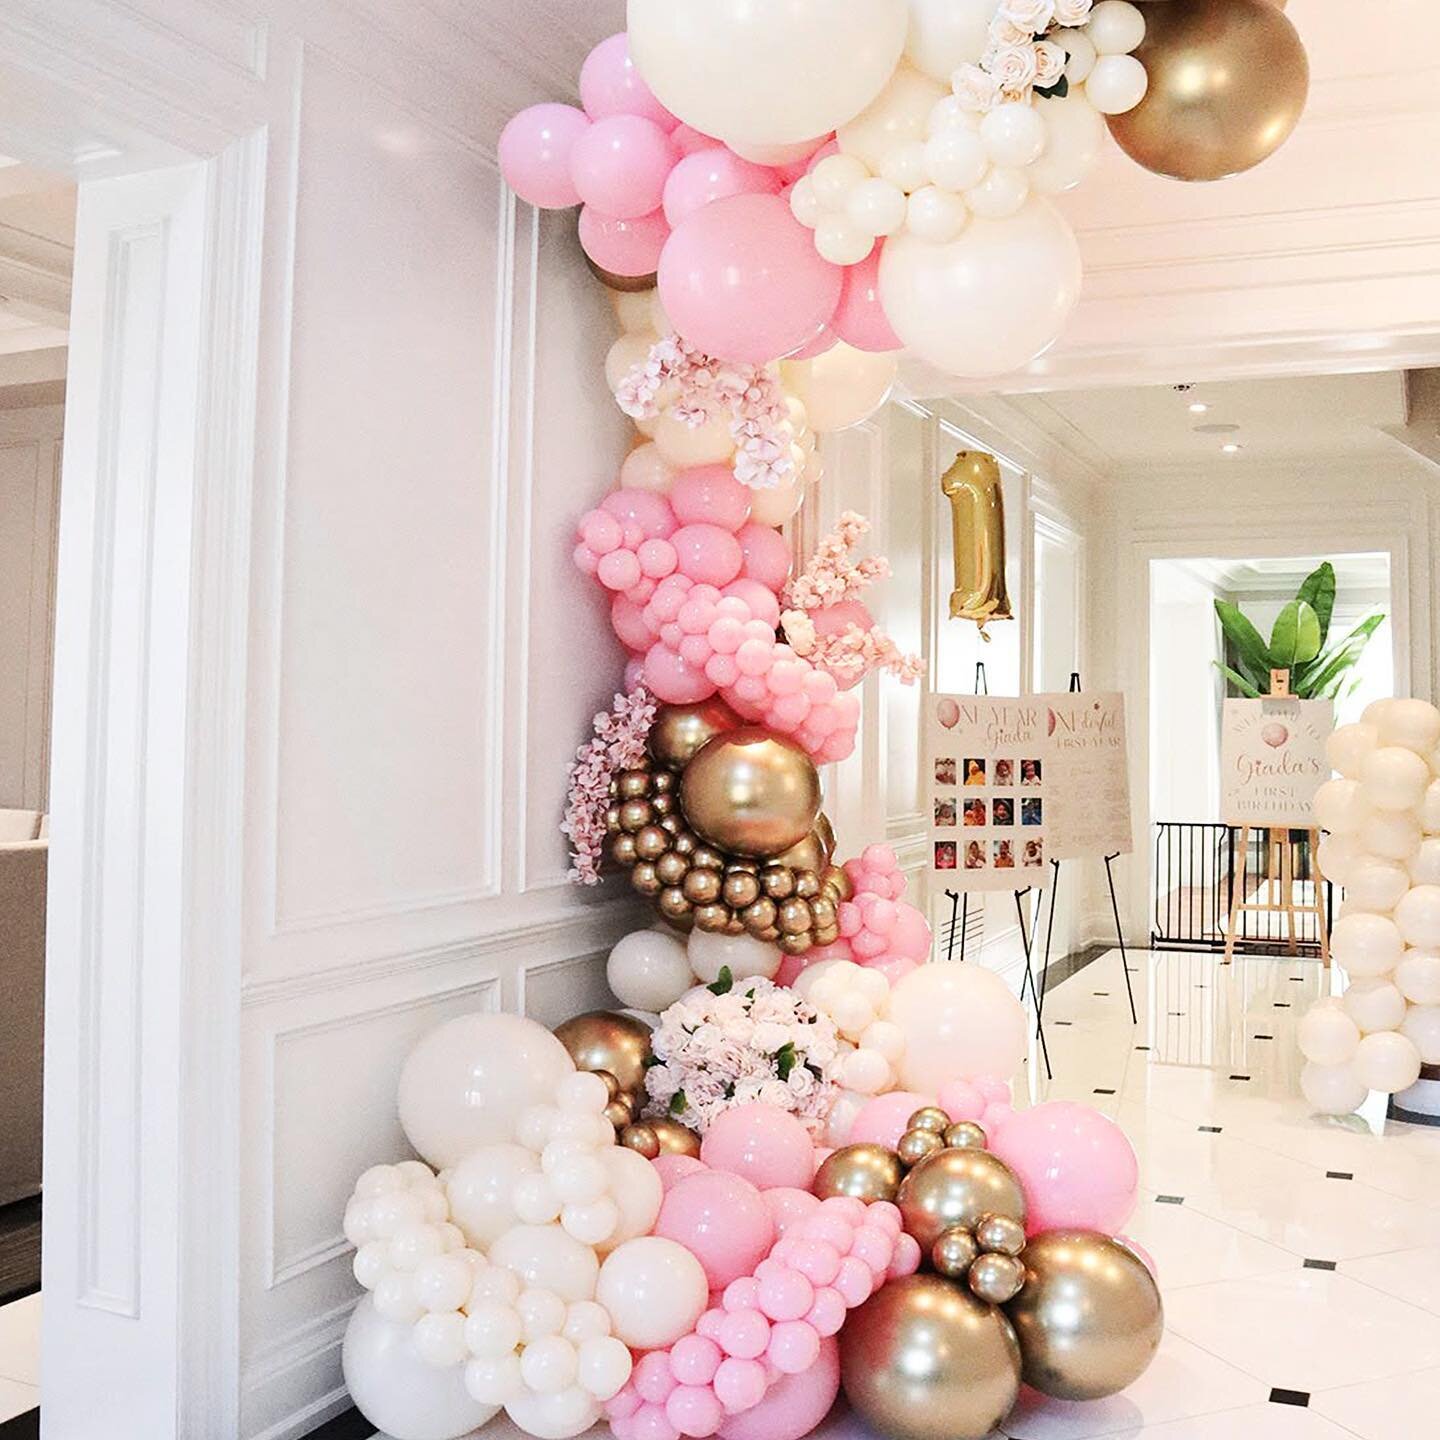 A glimpse of our ONEderful✨ Birthday creations! What theme would you wish for at your next event? 

#wewerethere #twinkletwinklelittlestar #firstbirthday #firstbirthdayinspo #ballooncluster #customballoons #balloondecor #balloongarland #pinkballoons 